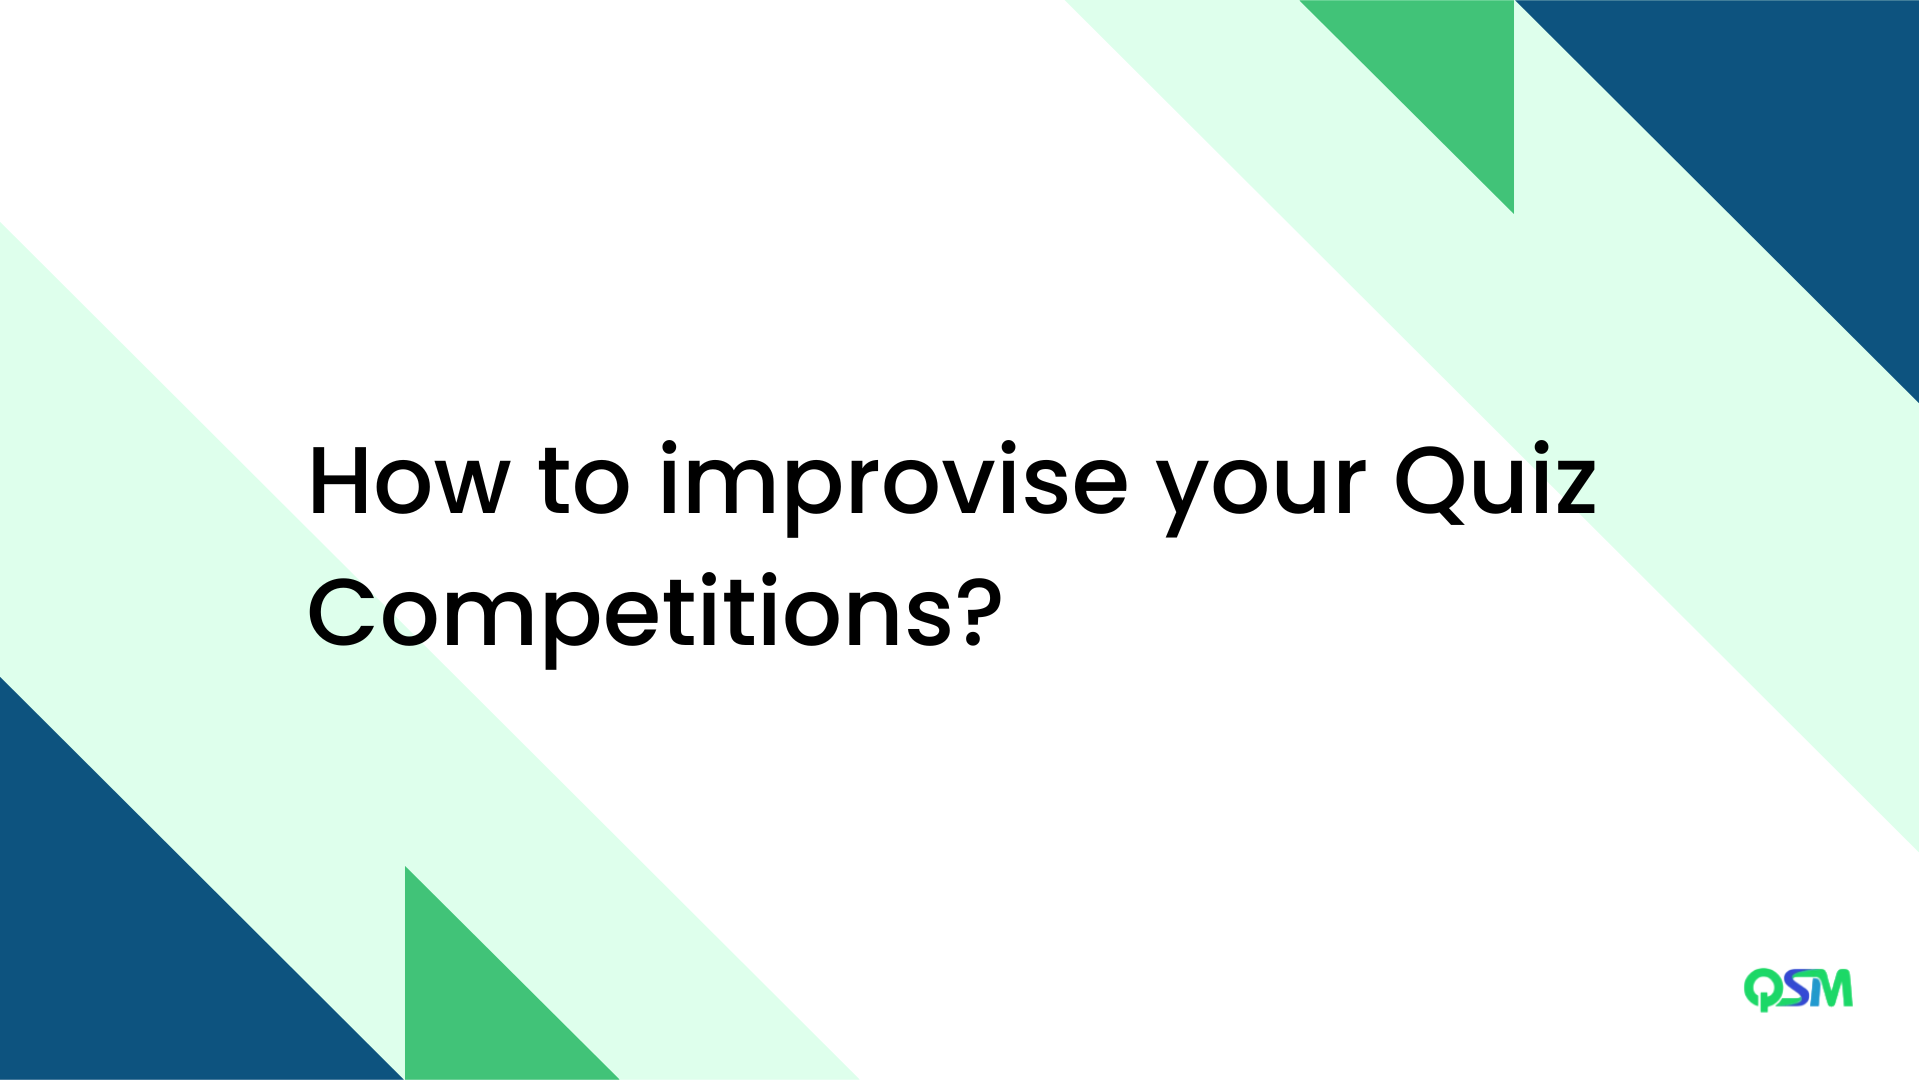 How to improvise your Quiz Competitions?